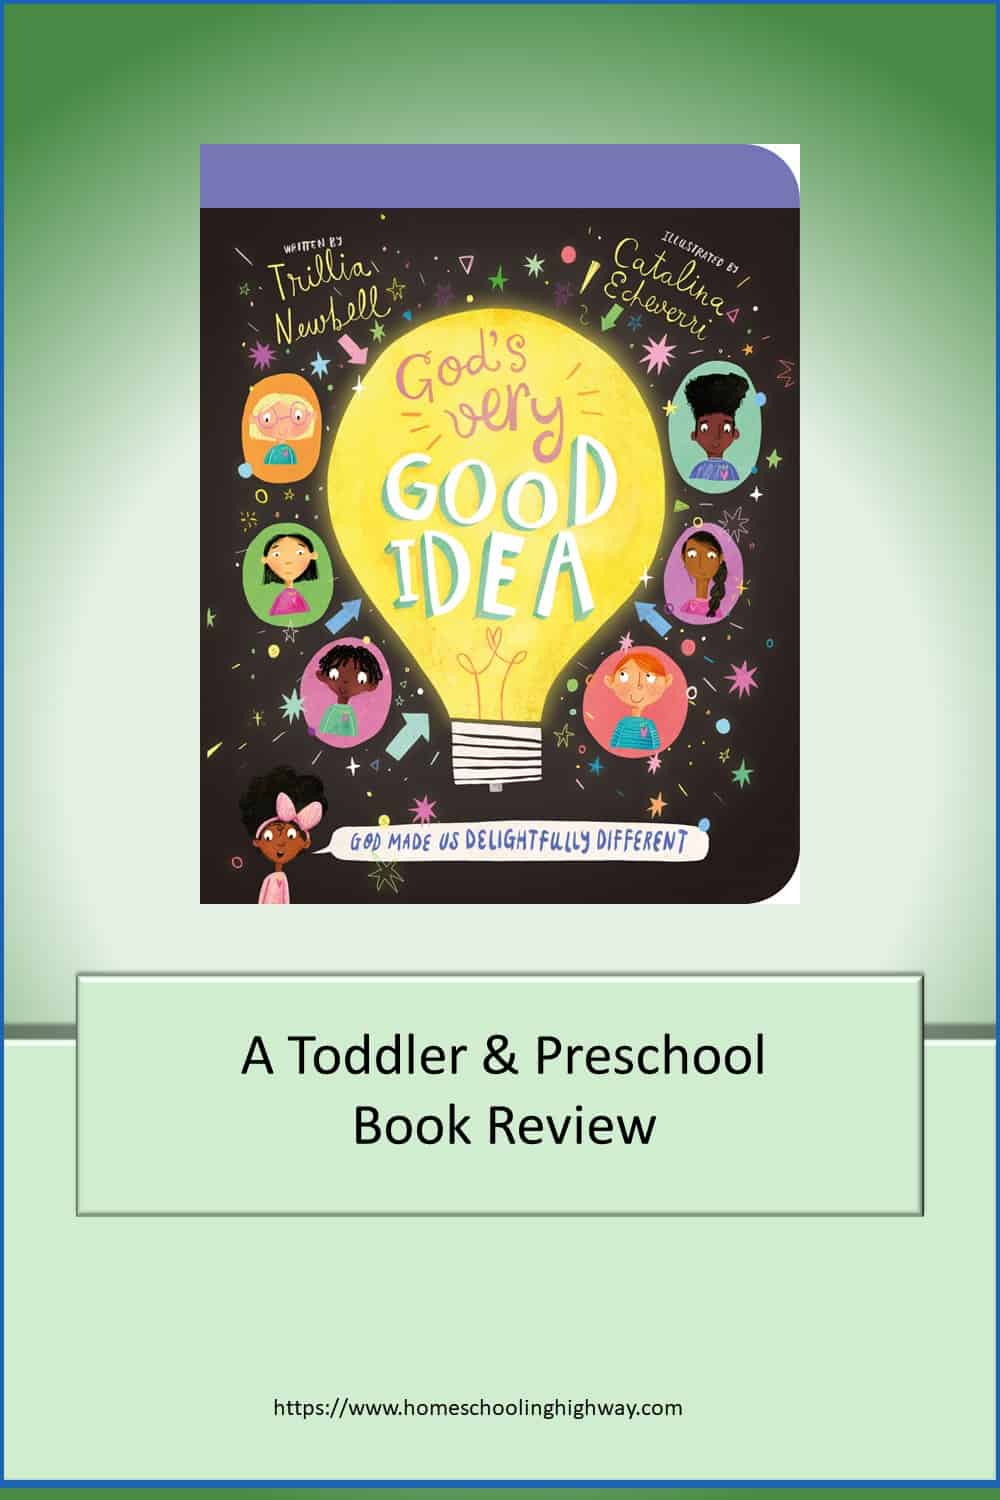 God's Very Good Idea. Reviewed by Homeschooling Highway